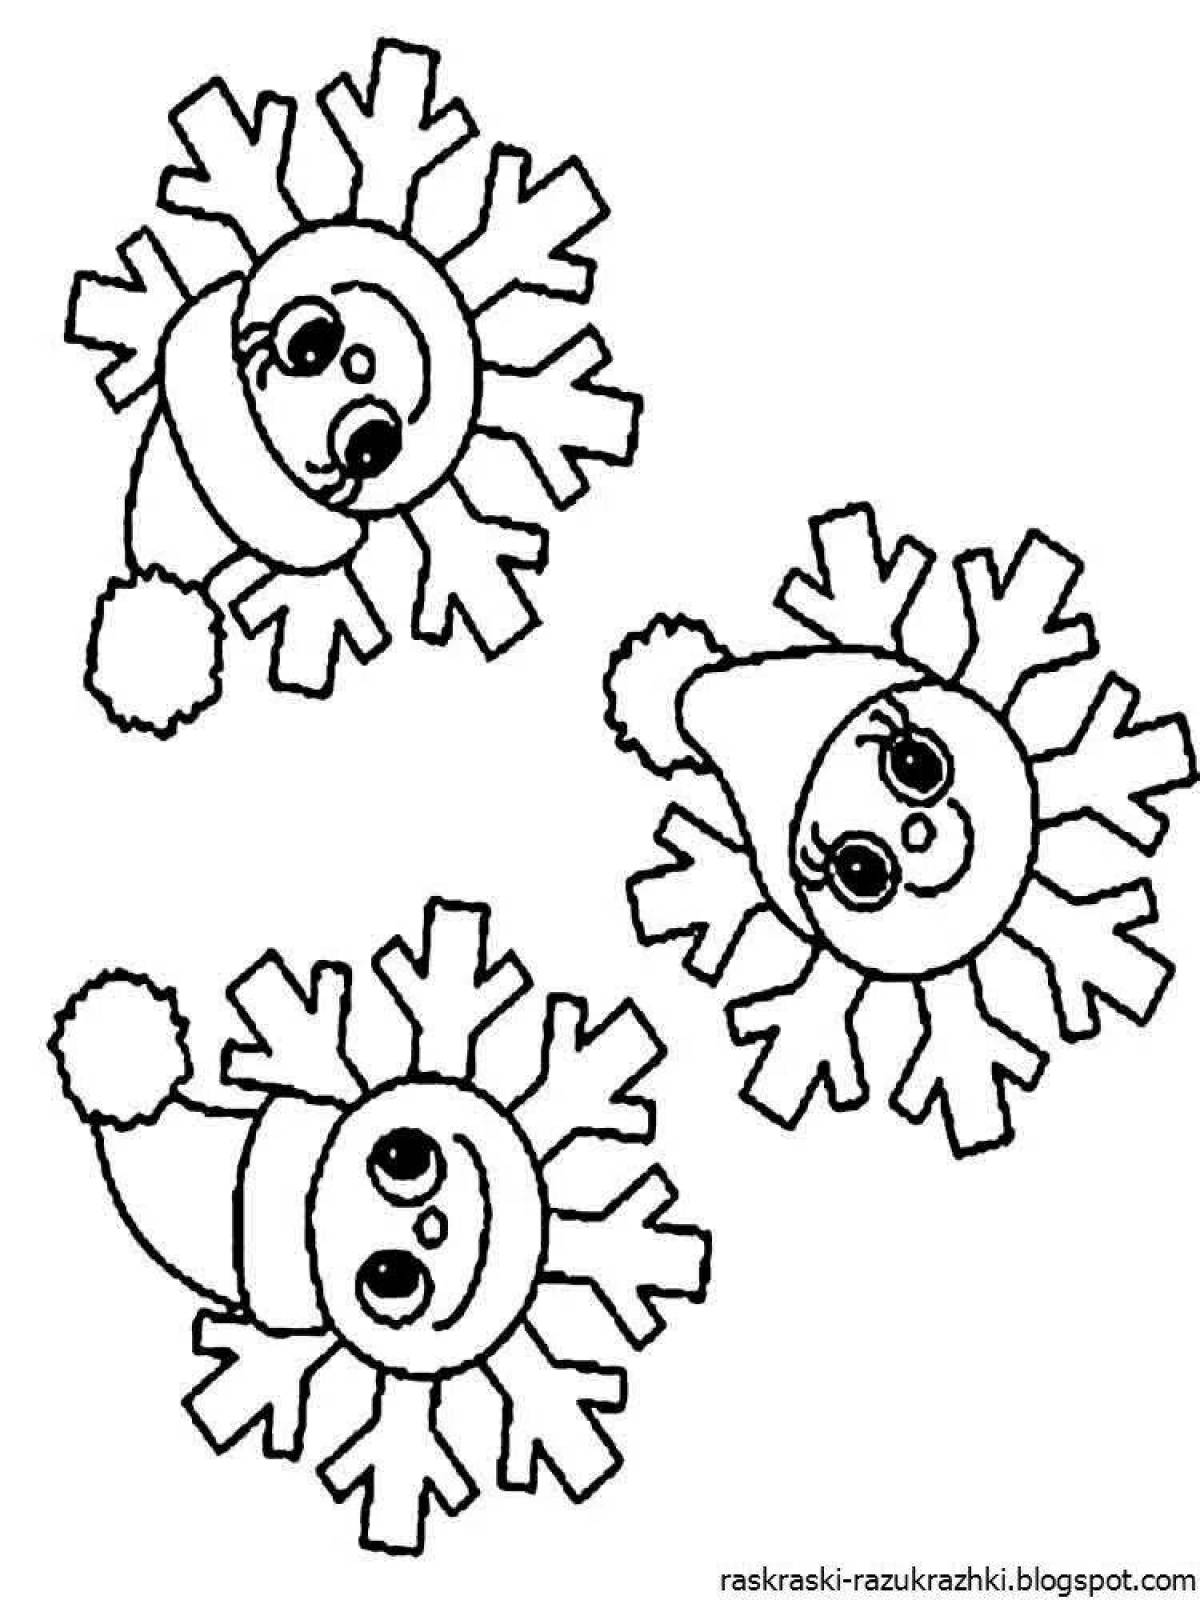 Coloring pages of snowflakes for children 4-5 years old